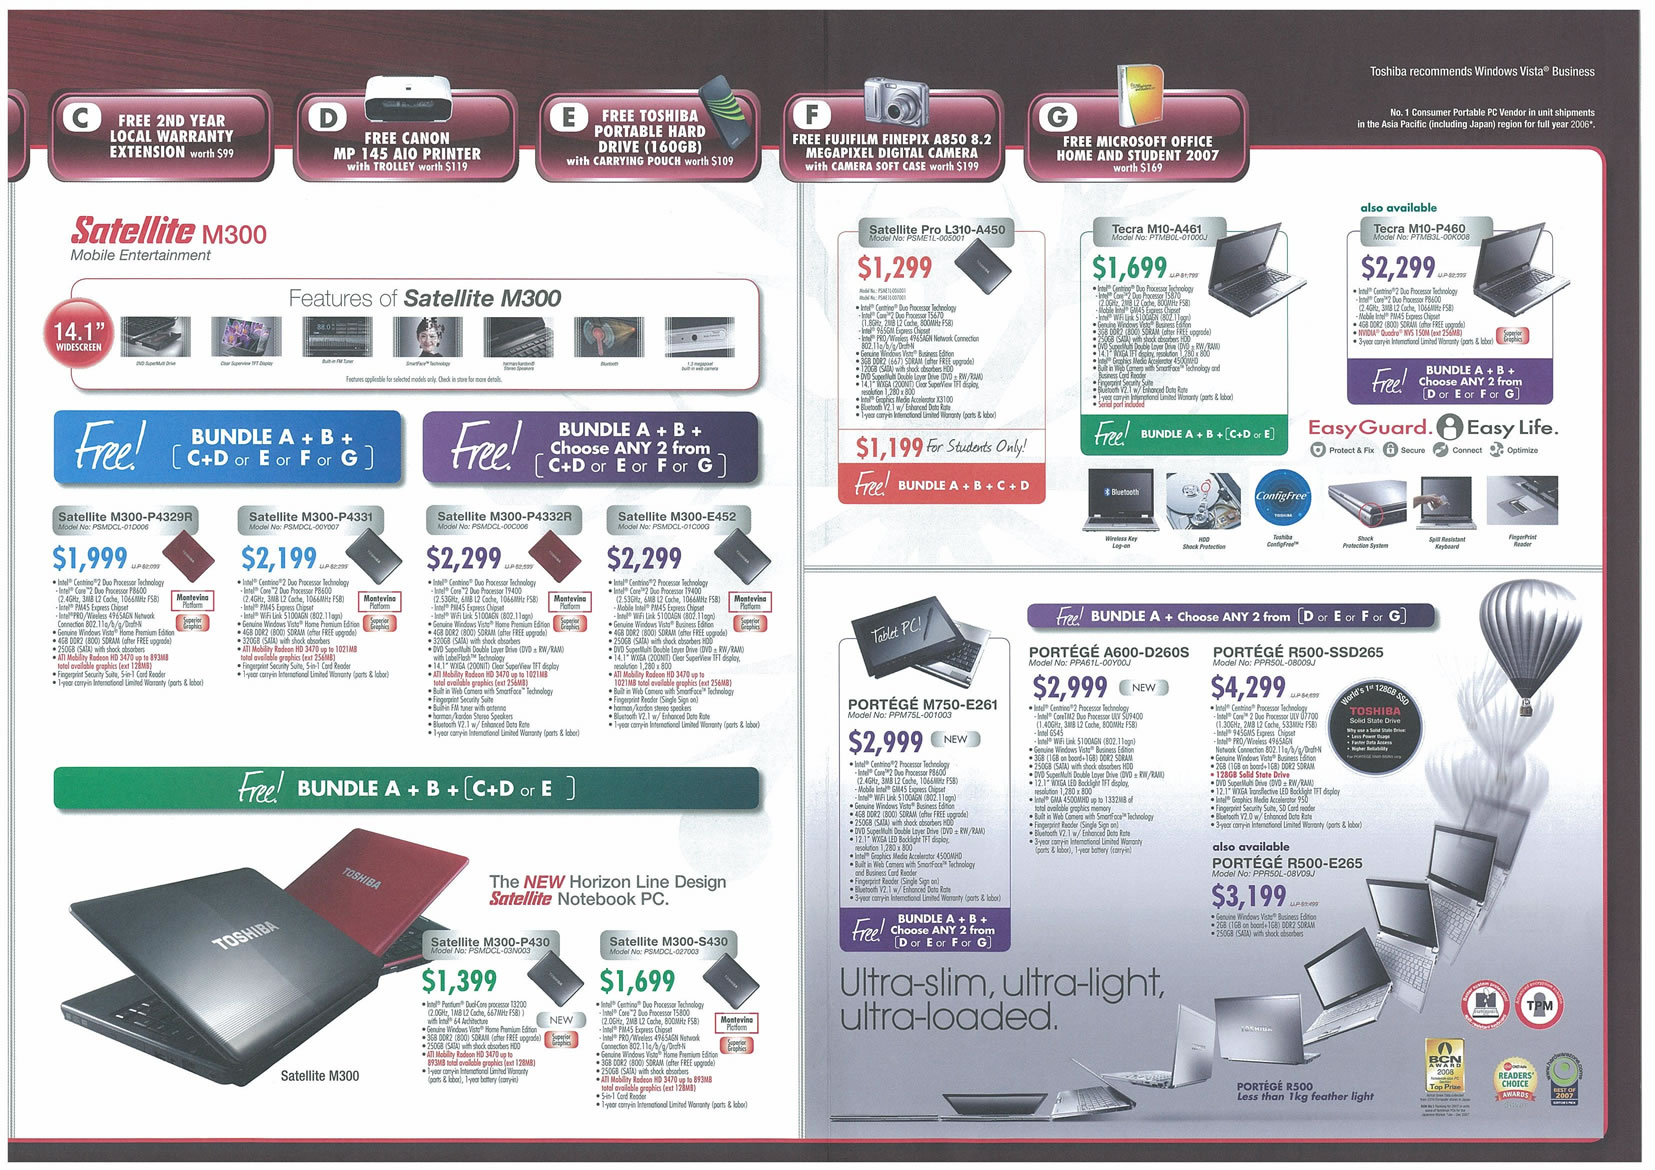 Sitex 2008 price list image brochure of Toshiba Notebooks 02 Page 2 - Vr-zone Tclong